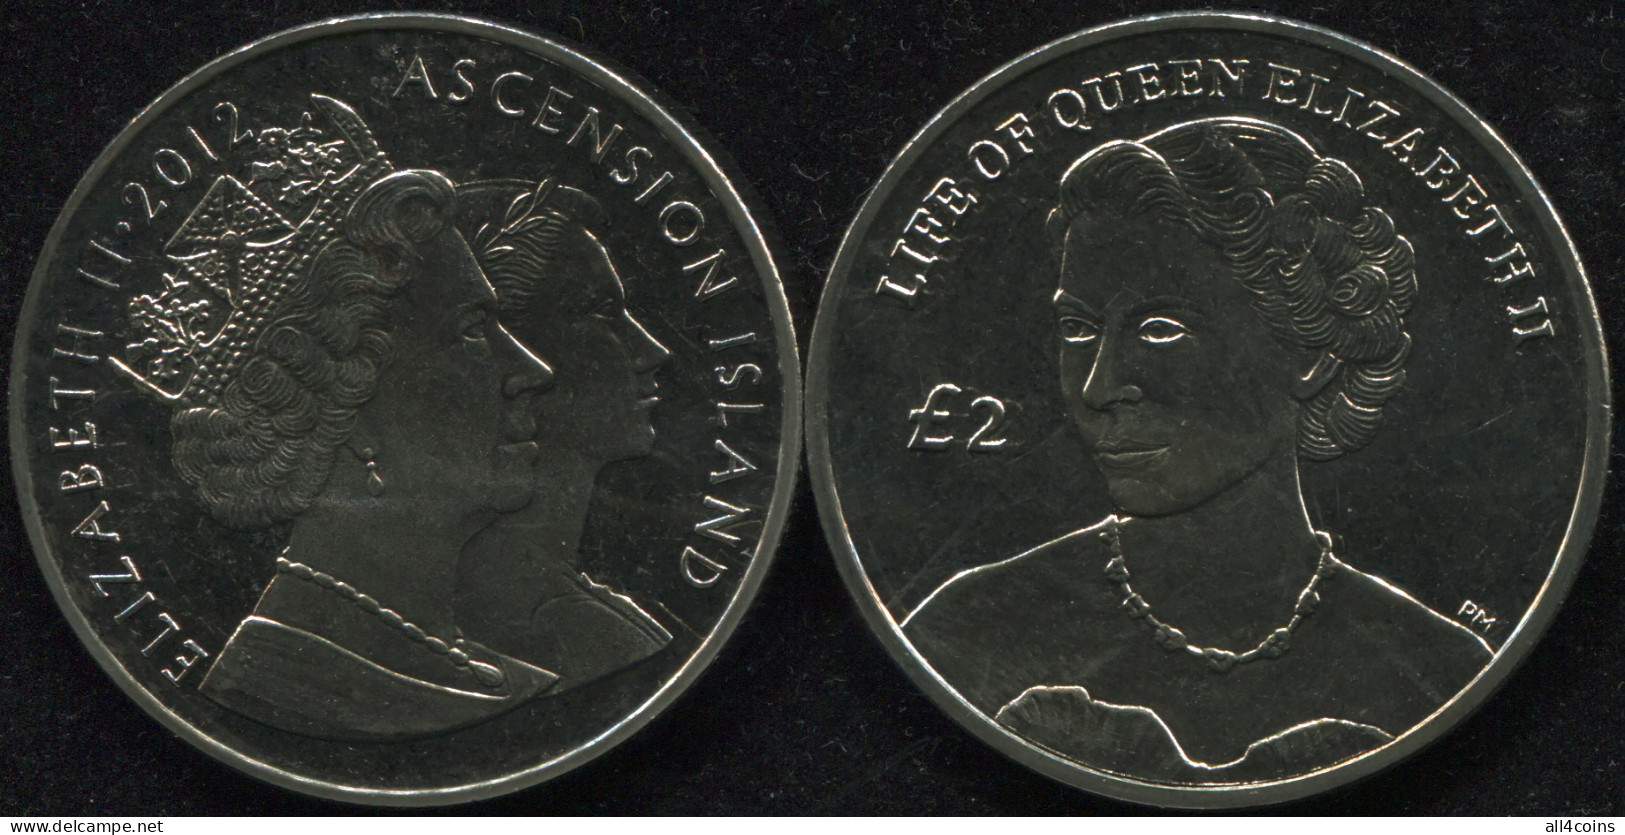 Ascension Island. 2 Pounds. 2012 (Coin KM#21. Unc) Life Of Queen Elizabeth II - Ascension (Insel)